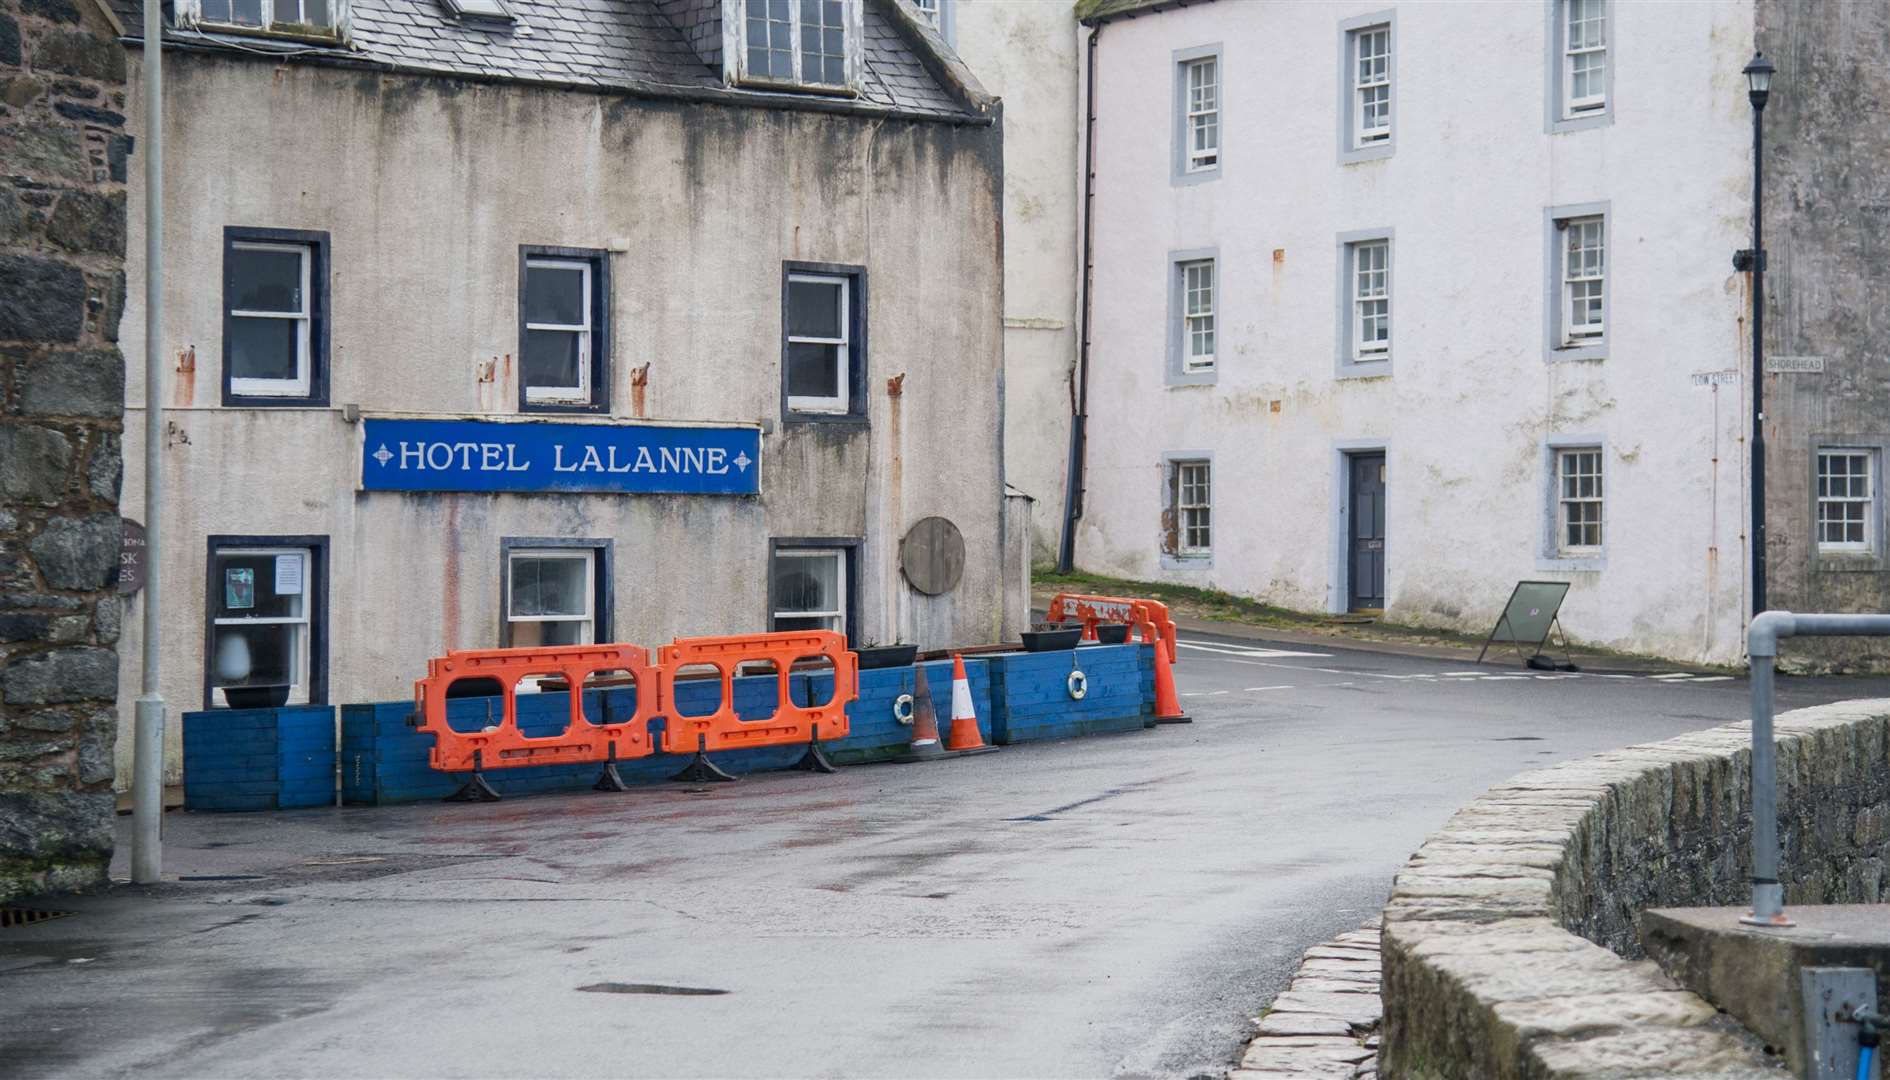 The Shore Inn, at Portsoy harbour, has been altered for the filming of Peaky Blinders. Picture: Becky Saunderson.